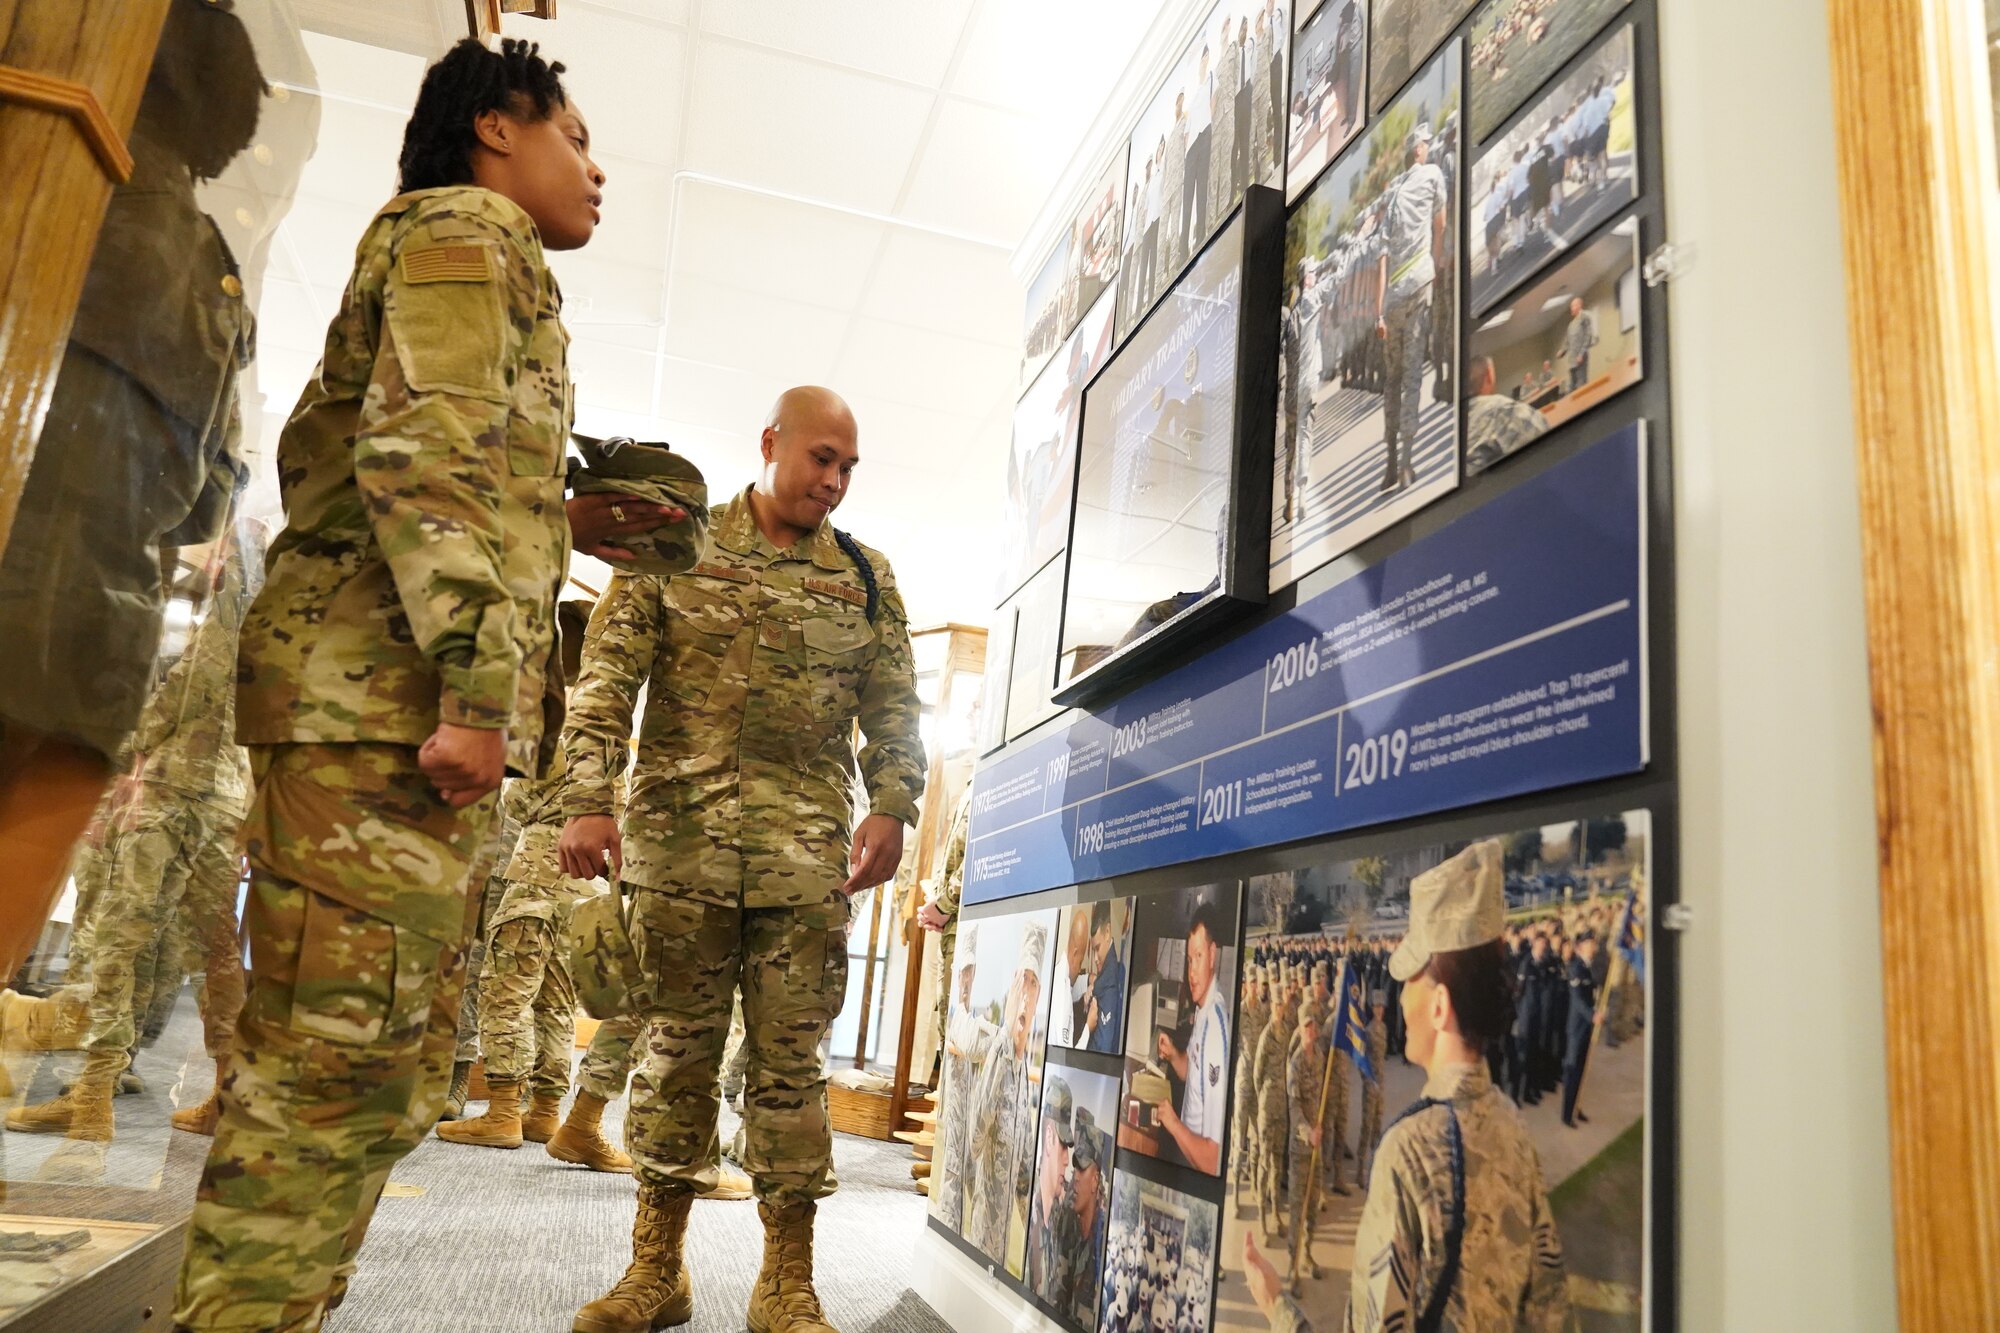 Military training leaders view the brand-new MTL wall at the Air Force Enlisted Heritage Hall at Maxwell Air Force Base Gunter Annex, Alabama, Oct. 30, 2019. MTLs play a vital role in the development of the next generation of Air Force leaders, warfighters, and protectors of freedom. The Air Force Enlisted Heritage Hall has dedicated a wall to highlight their lineage and contributions to the Air Force. (U.S Air Force photo by Airman 1st Class Spencer Tobler)